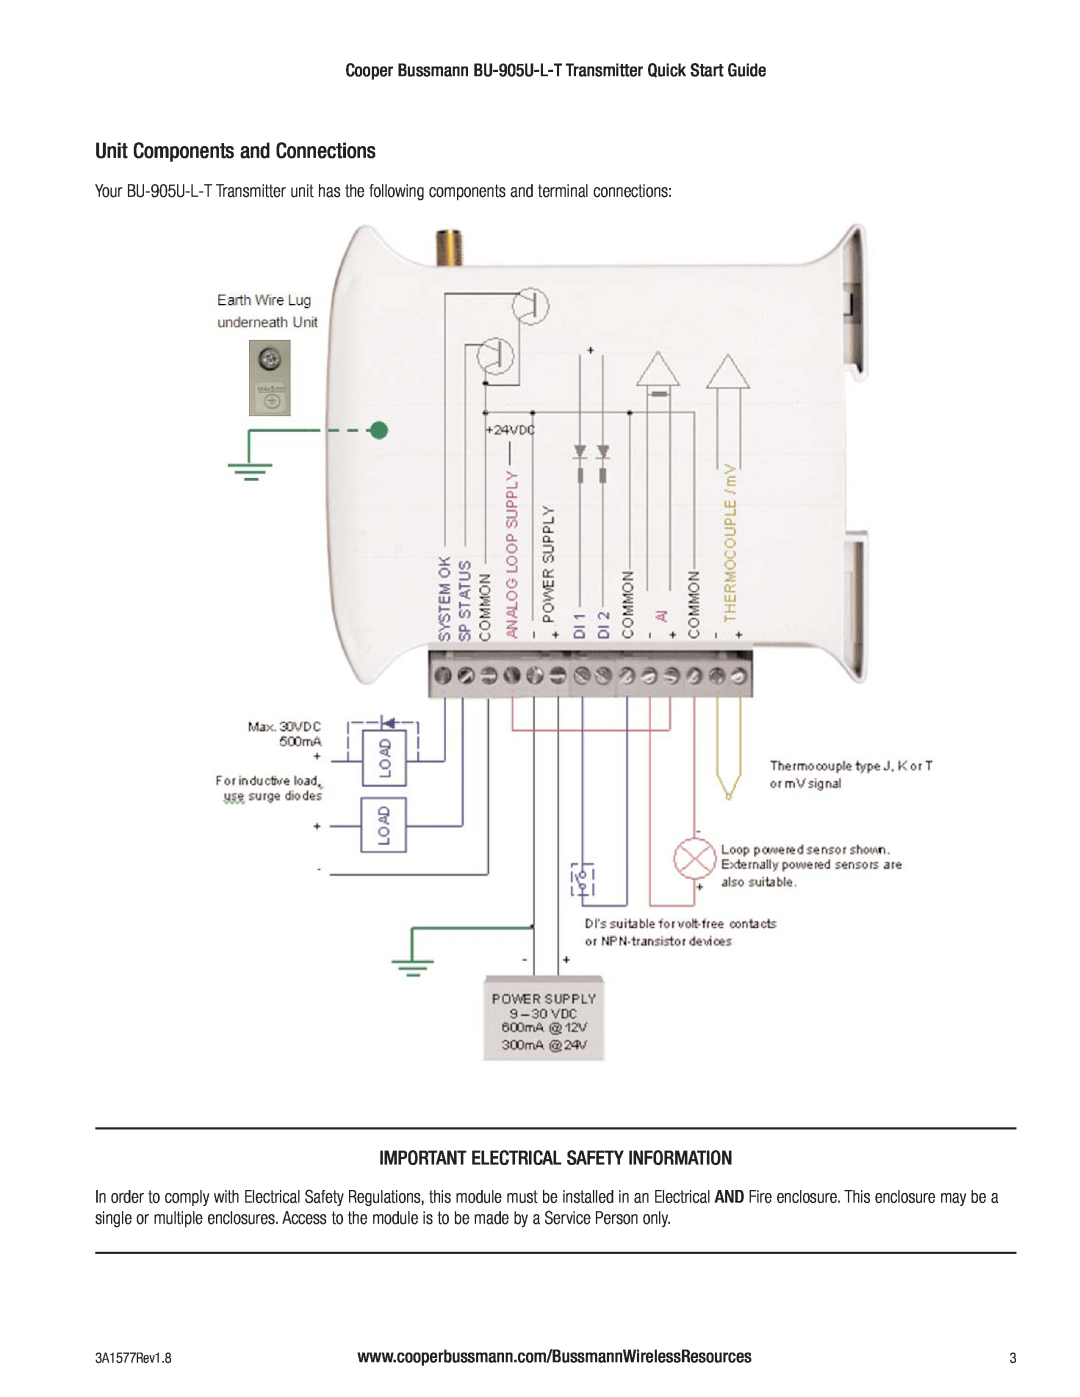 Cooper Bussmann BU-905U-L-T quick start Unit Components and Connections, Important Electrical Safety Information 